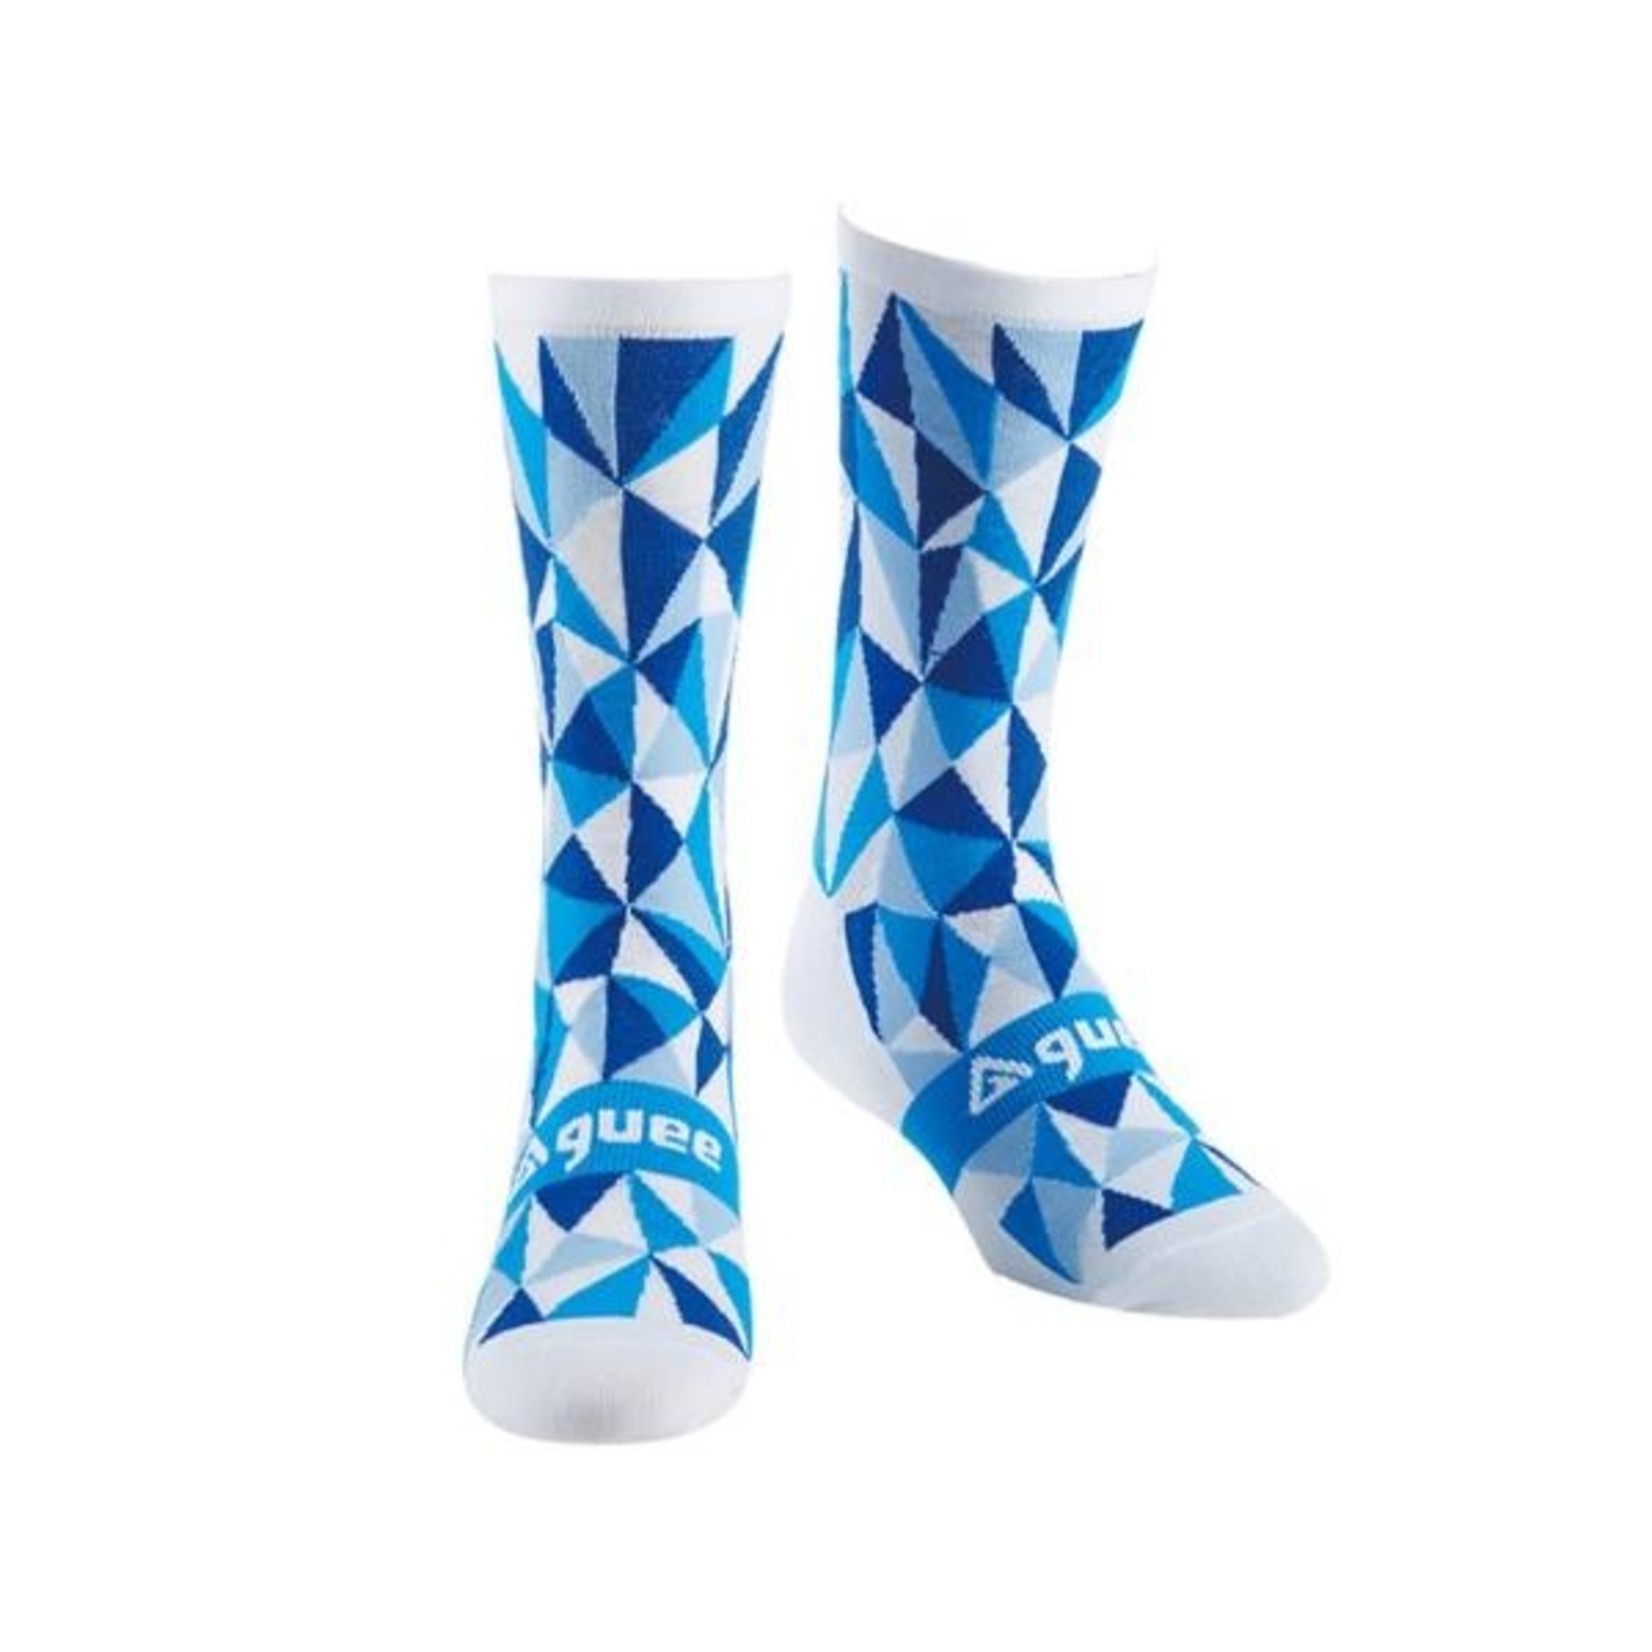 Guee Guee Socks - Geo Racefit -Colour White & Blue - Size Smal Material: Polyamide